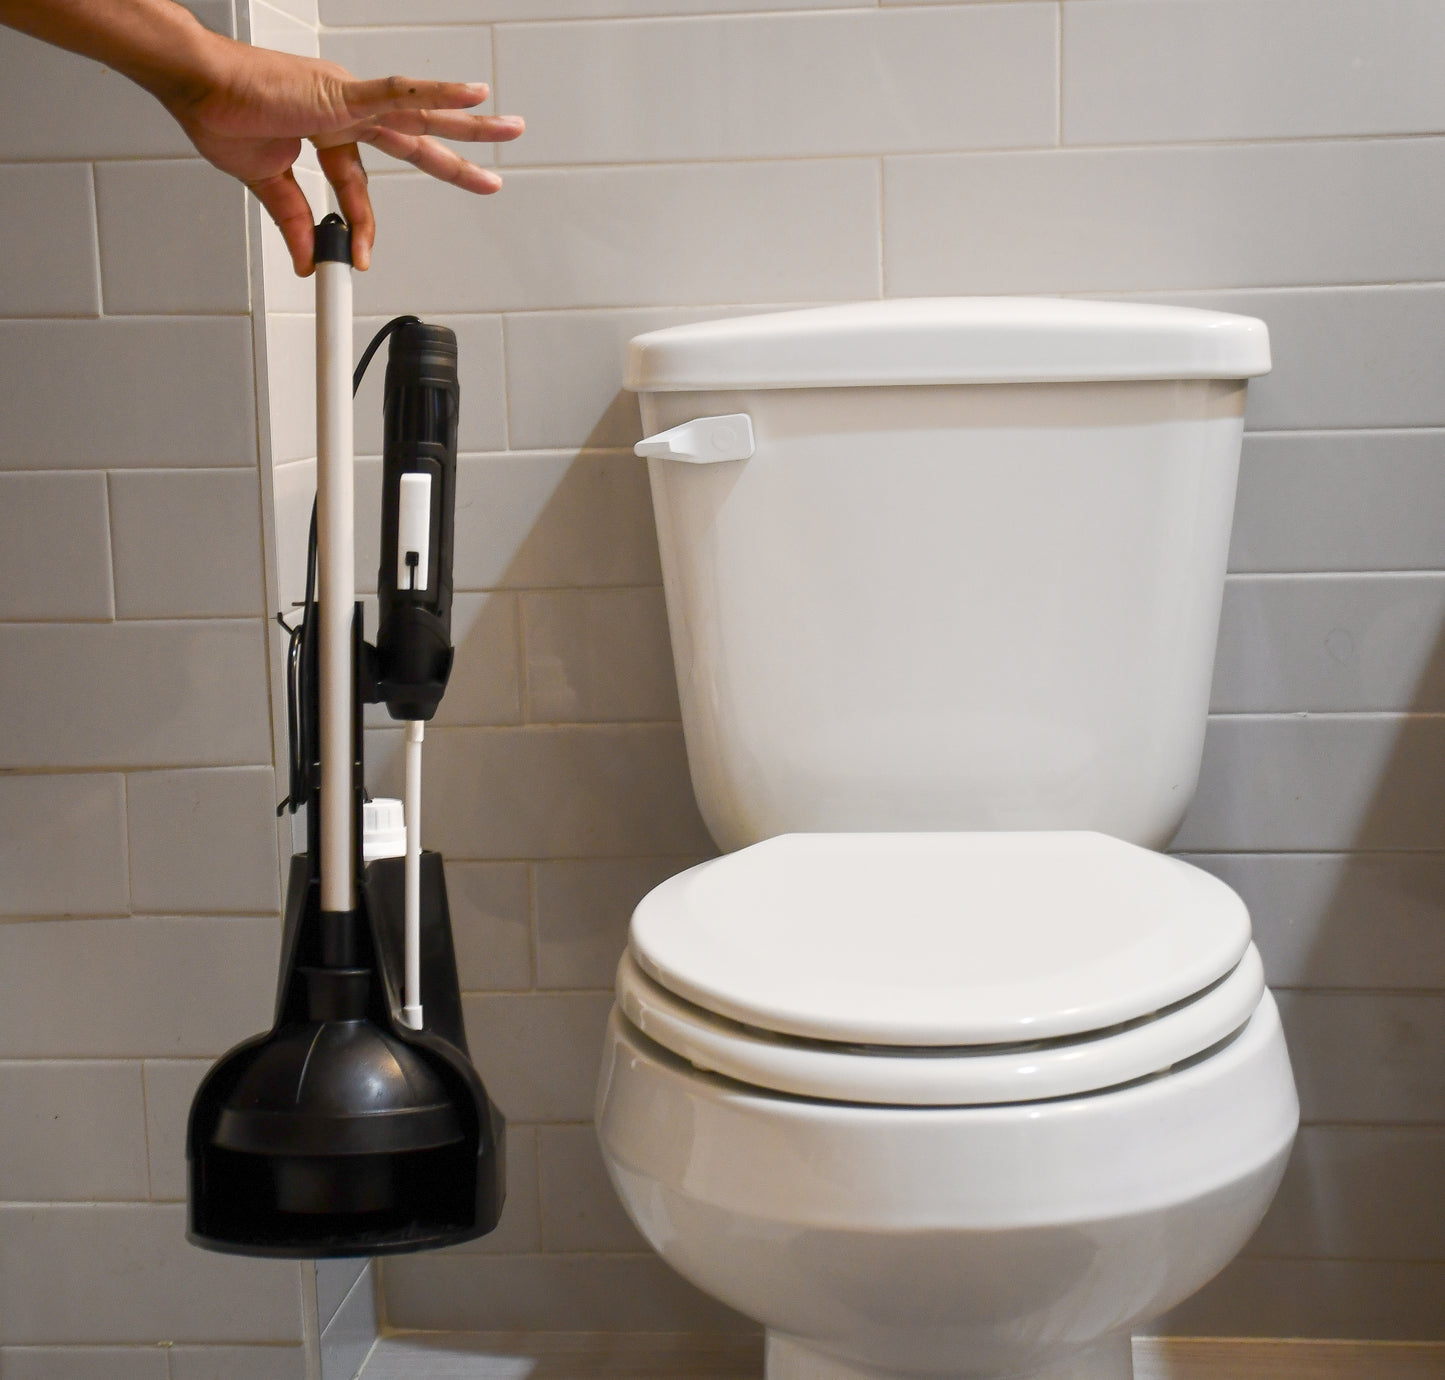 Plunger with self-cleaning mechanism.  Disinfect your plunger and your bathroom.